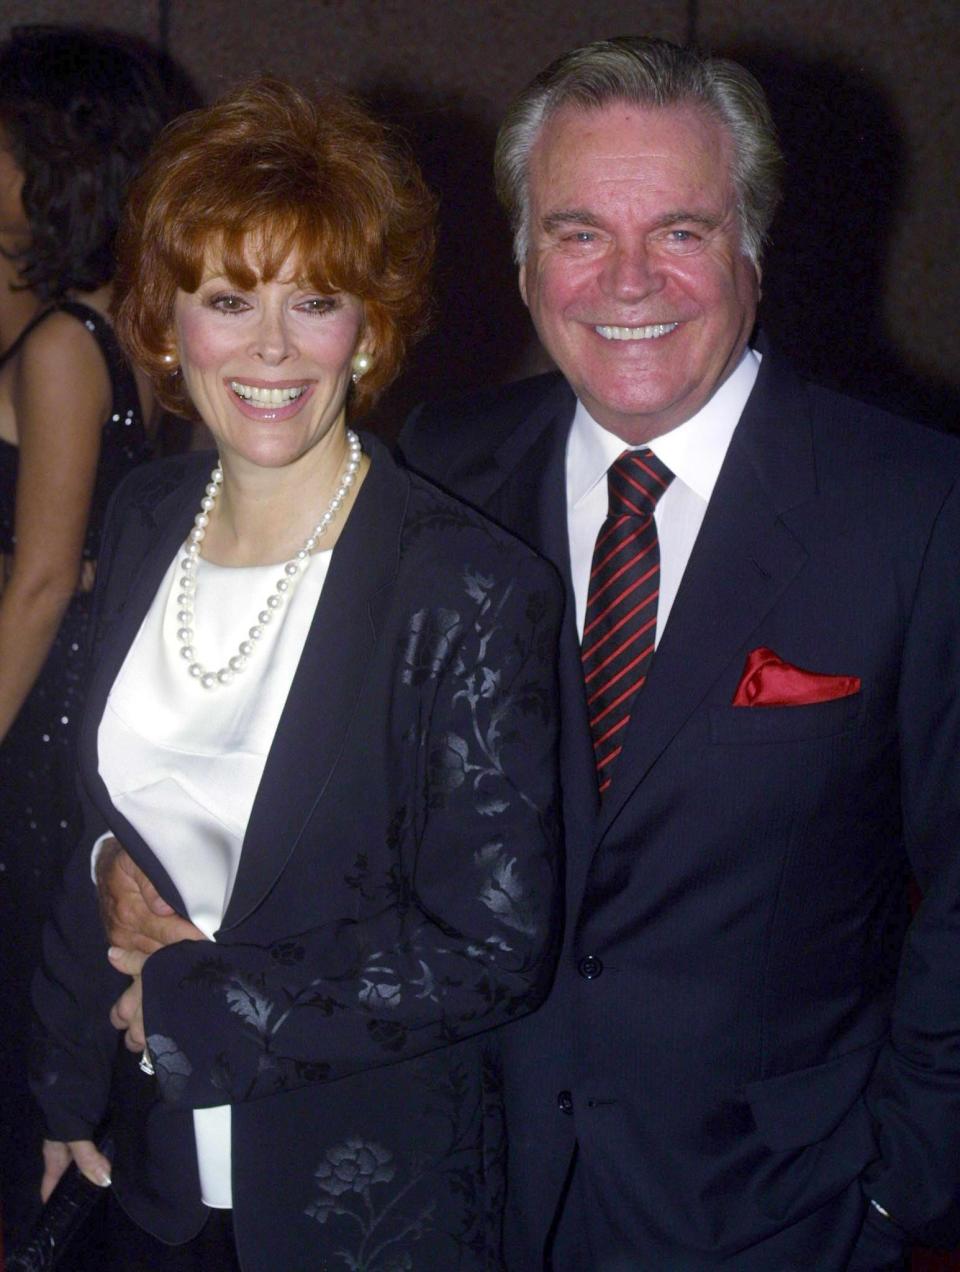 Jill St. John (seen here in 2001 with husband Robert Wagner) told Vanity Fair that working with Jerry Lewis was "an unhappy and disappointing experience."